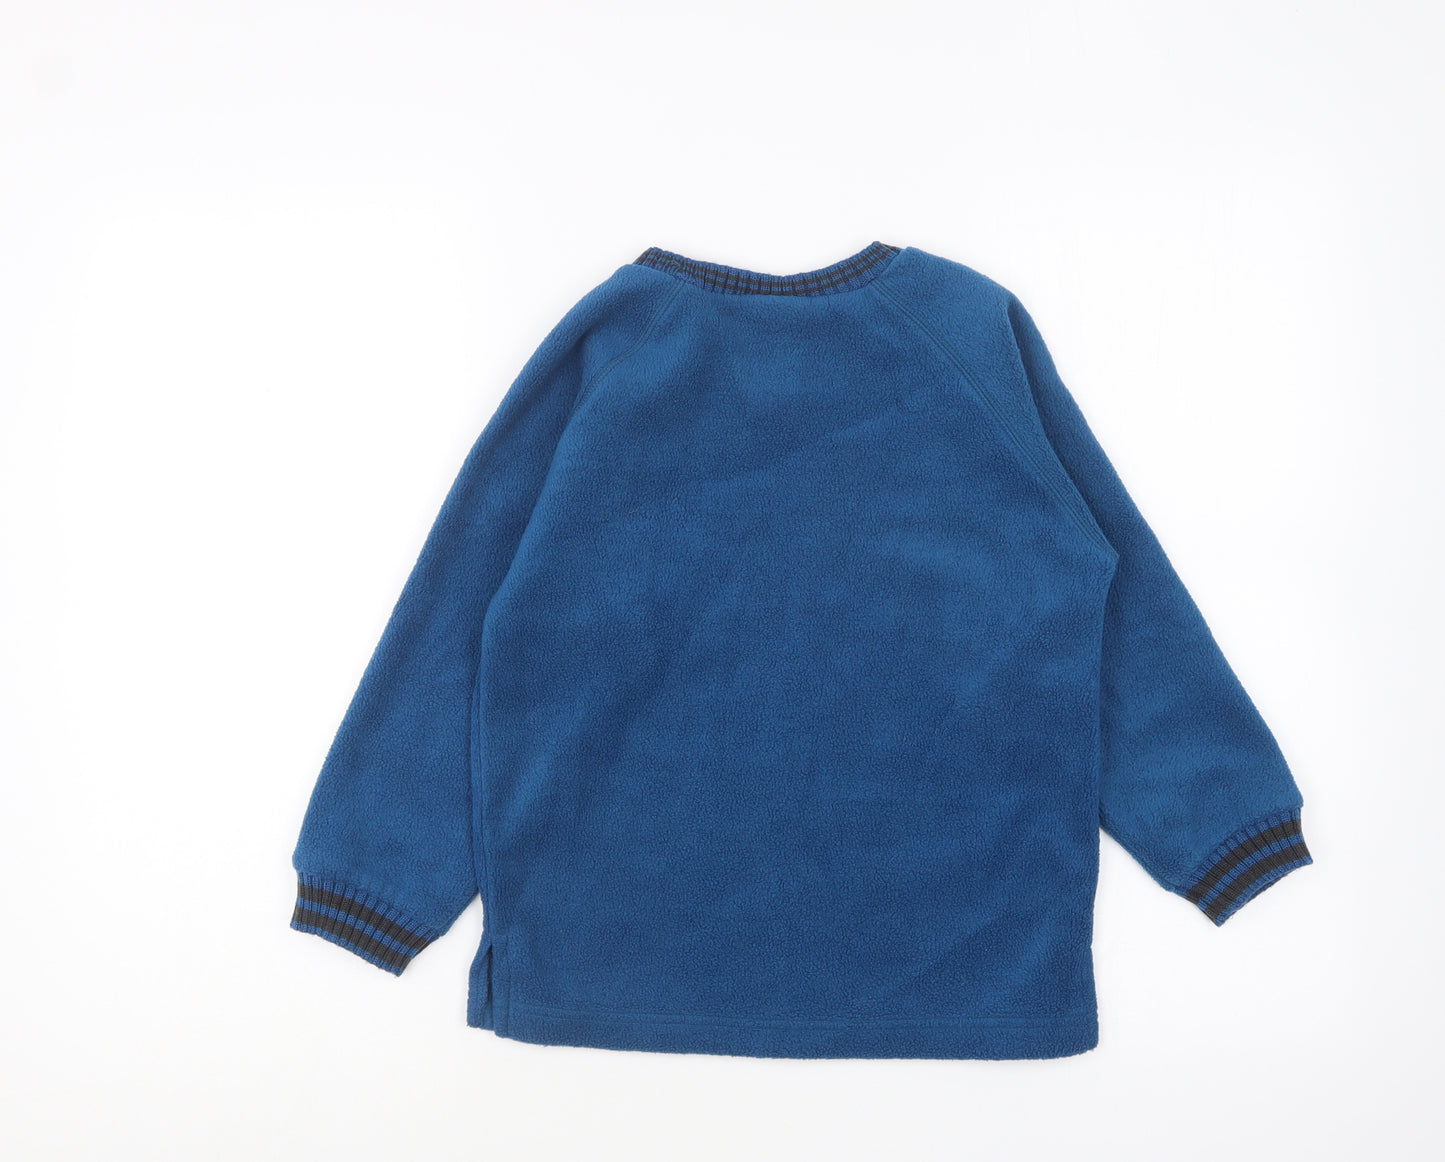 Rebel Active Boys Blue Polyester Pullover Sweatshirt Size 5-6 Years Pullover